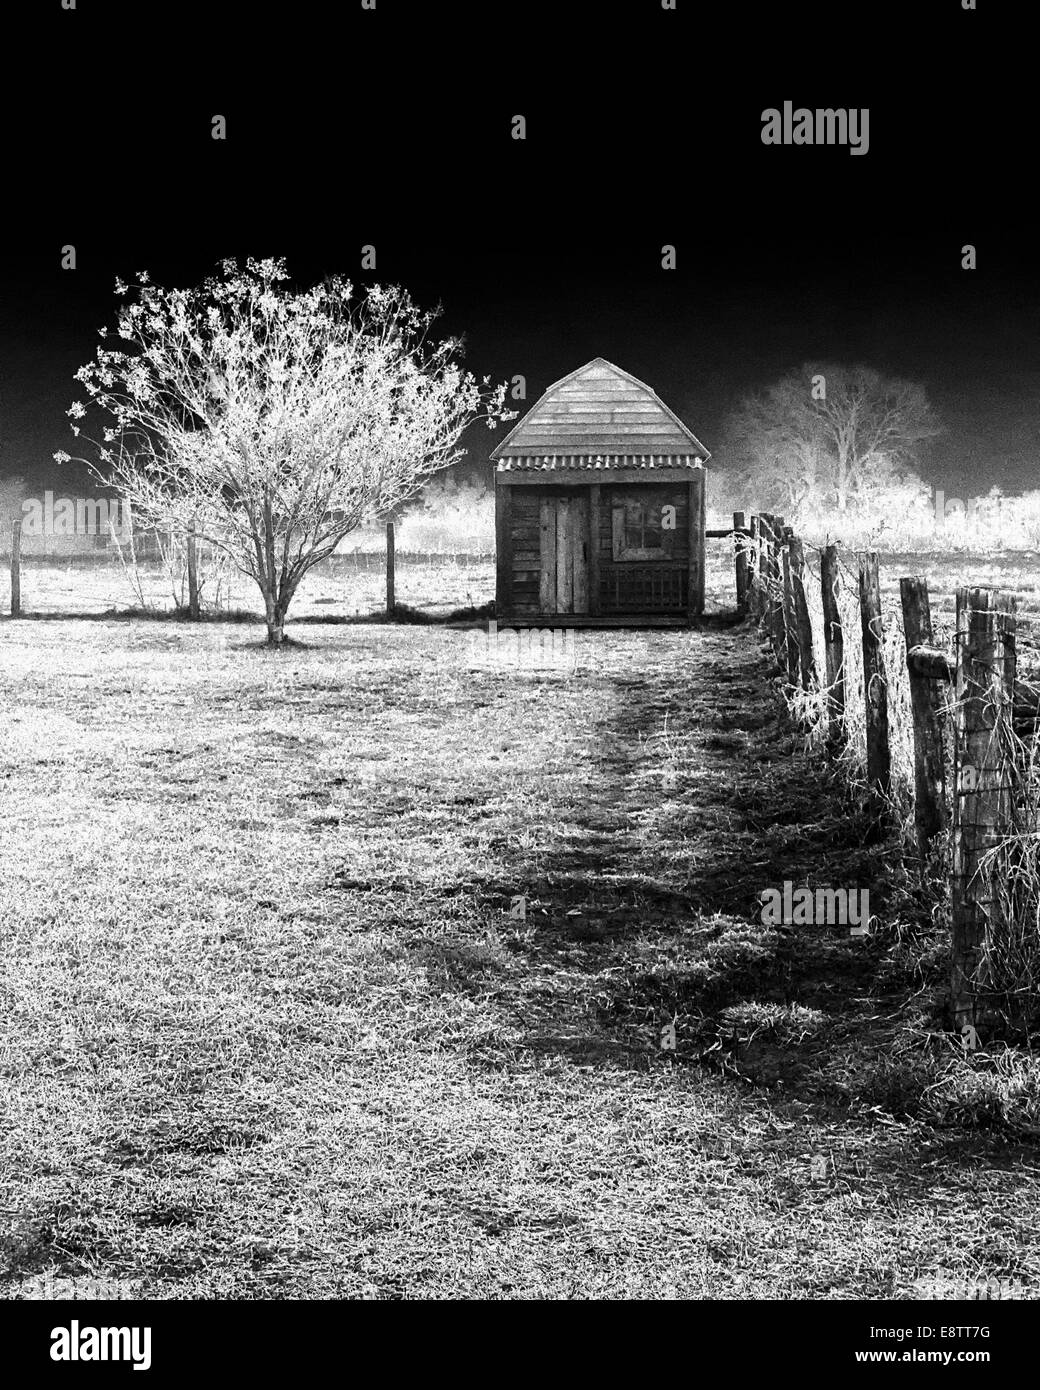 Infrared picture with trees, fence and small building Stock Photo